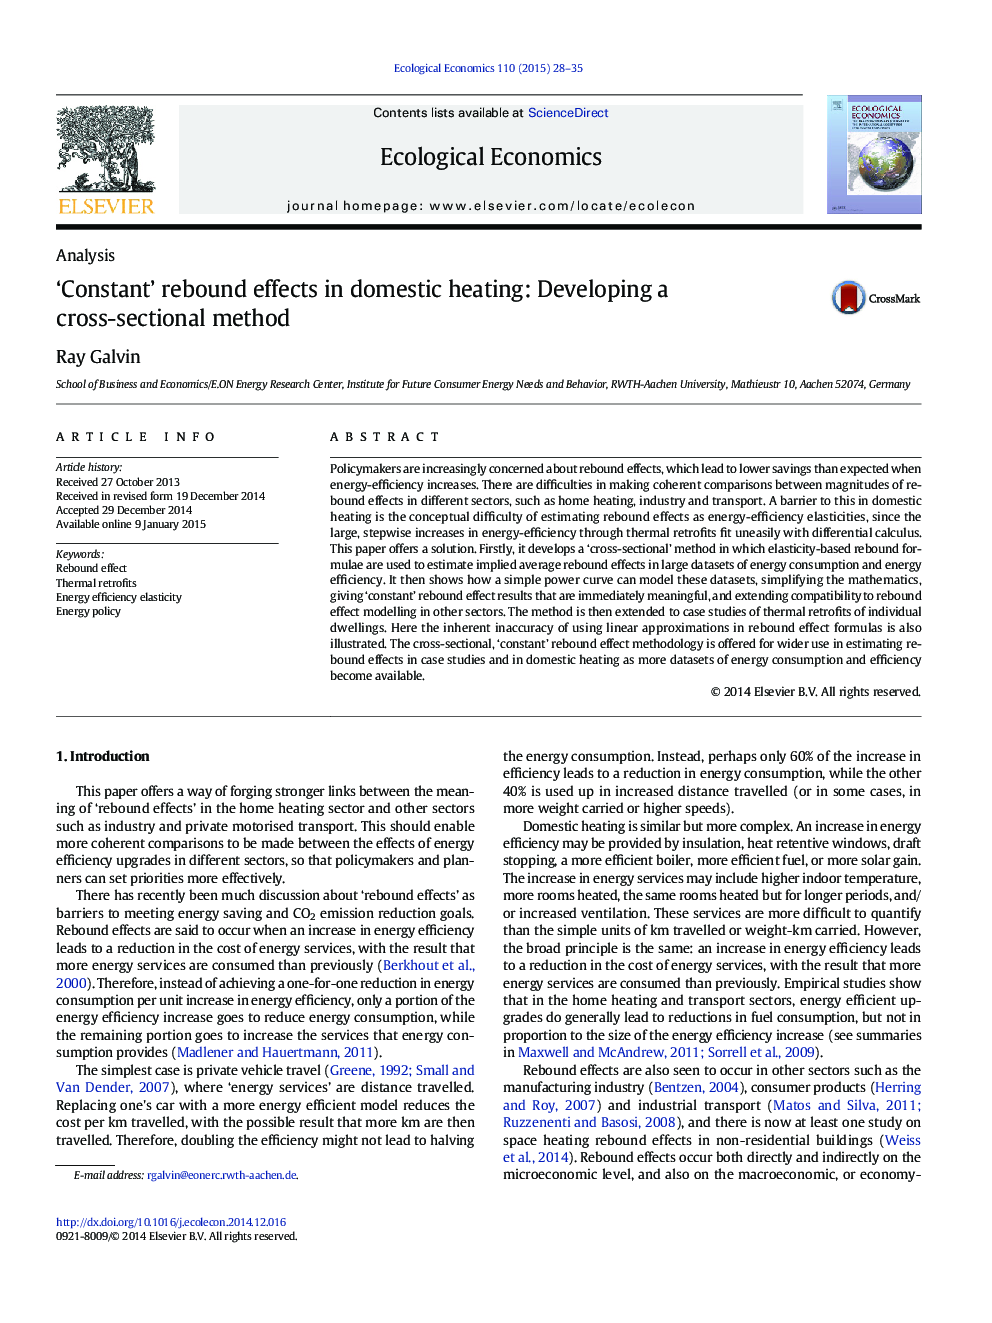 'Constant' rebound effects in domestic heating: Developing a cross-sectional method